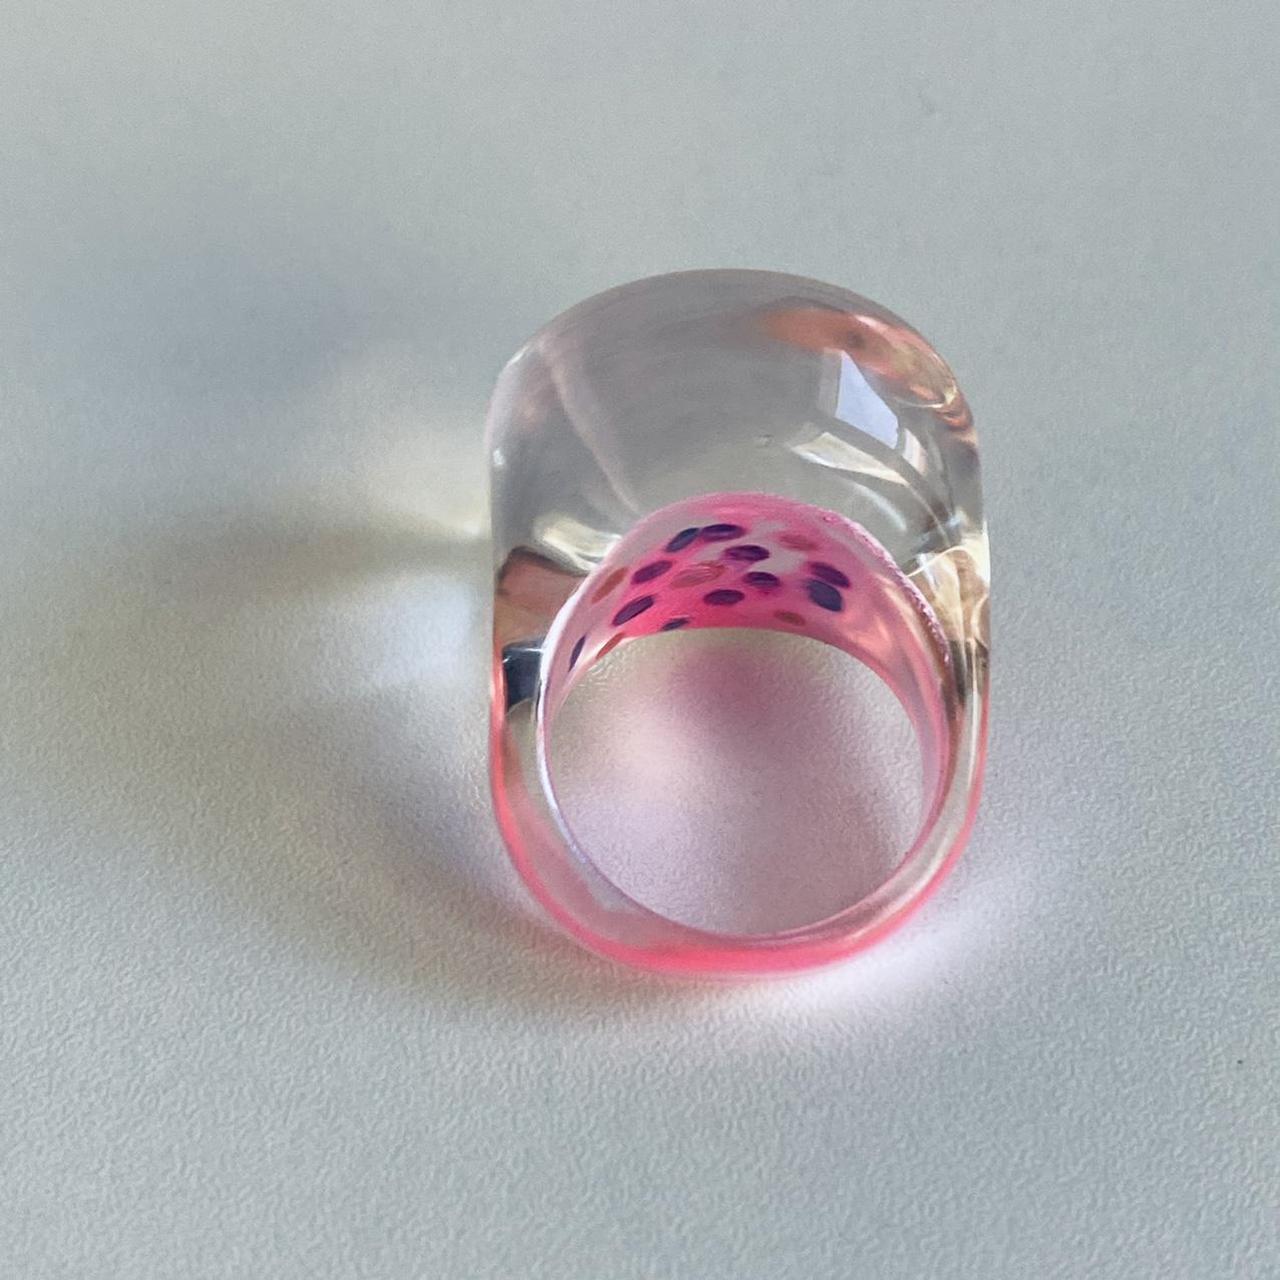 Louis vuitton bubble ring in pink! Some scratches - Depop